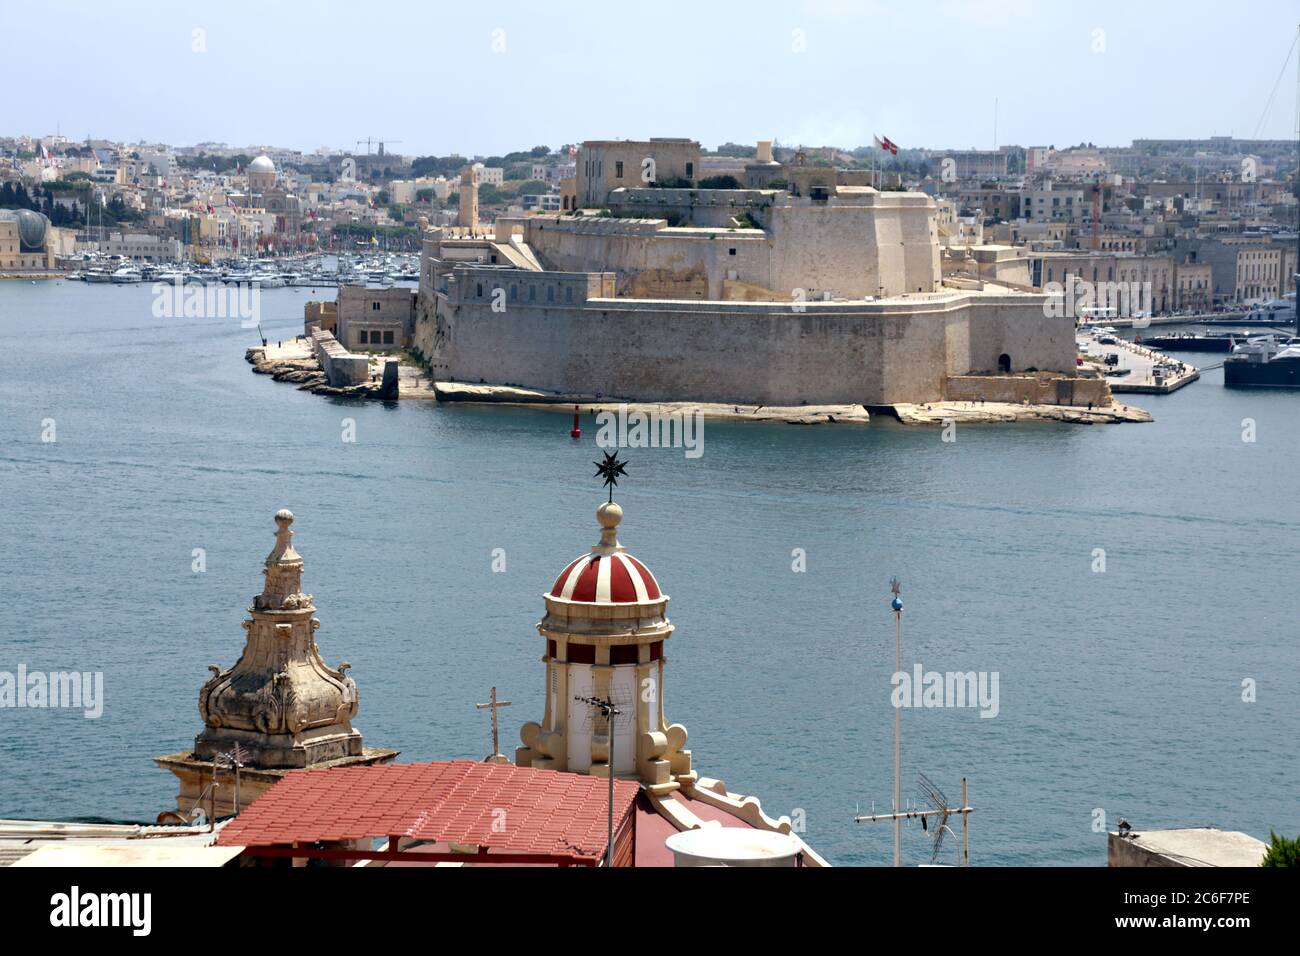 Birgu (Vittoriosa). Malta. Fort San Angelo seen over the Grand Harbour. A view from Valletta waterfront. Stock Photo